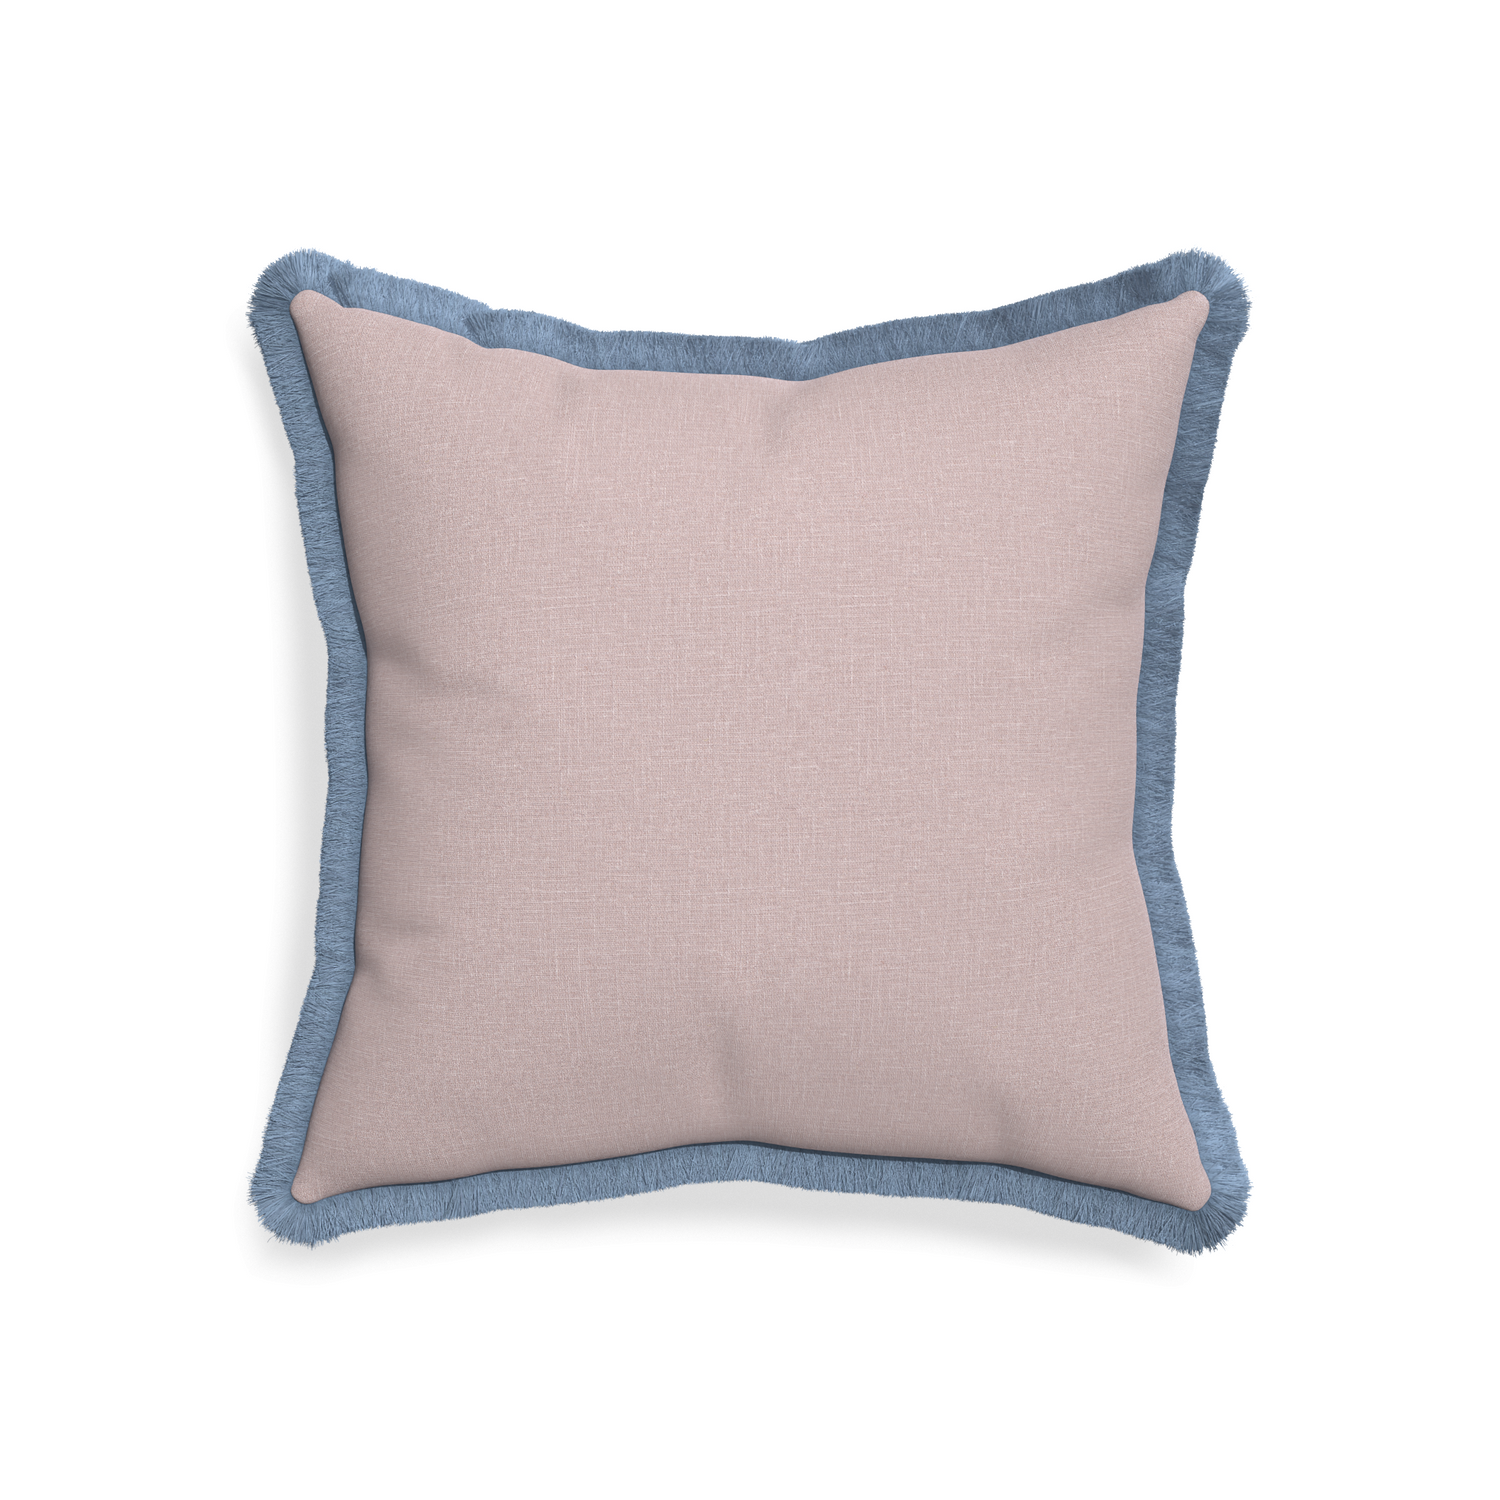 20-square orchid custom mauve pinkpillow with sky fringe on white background